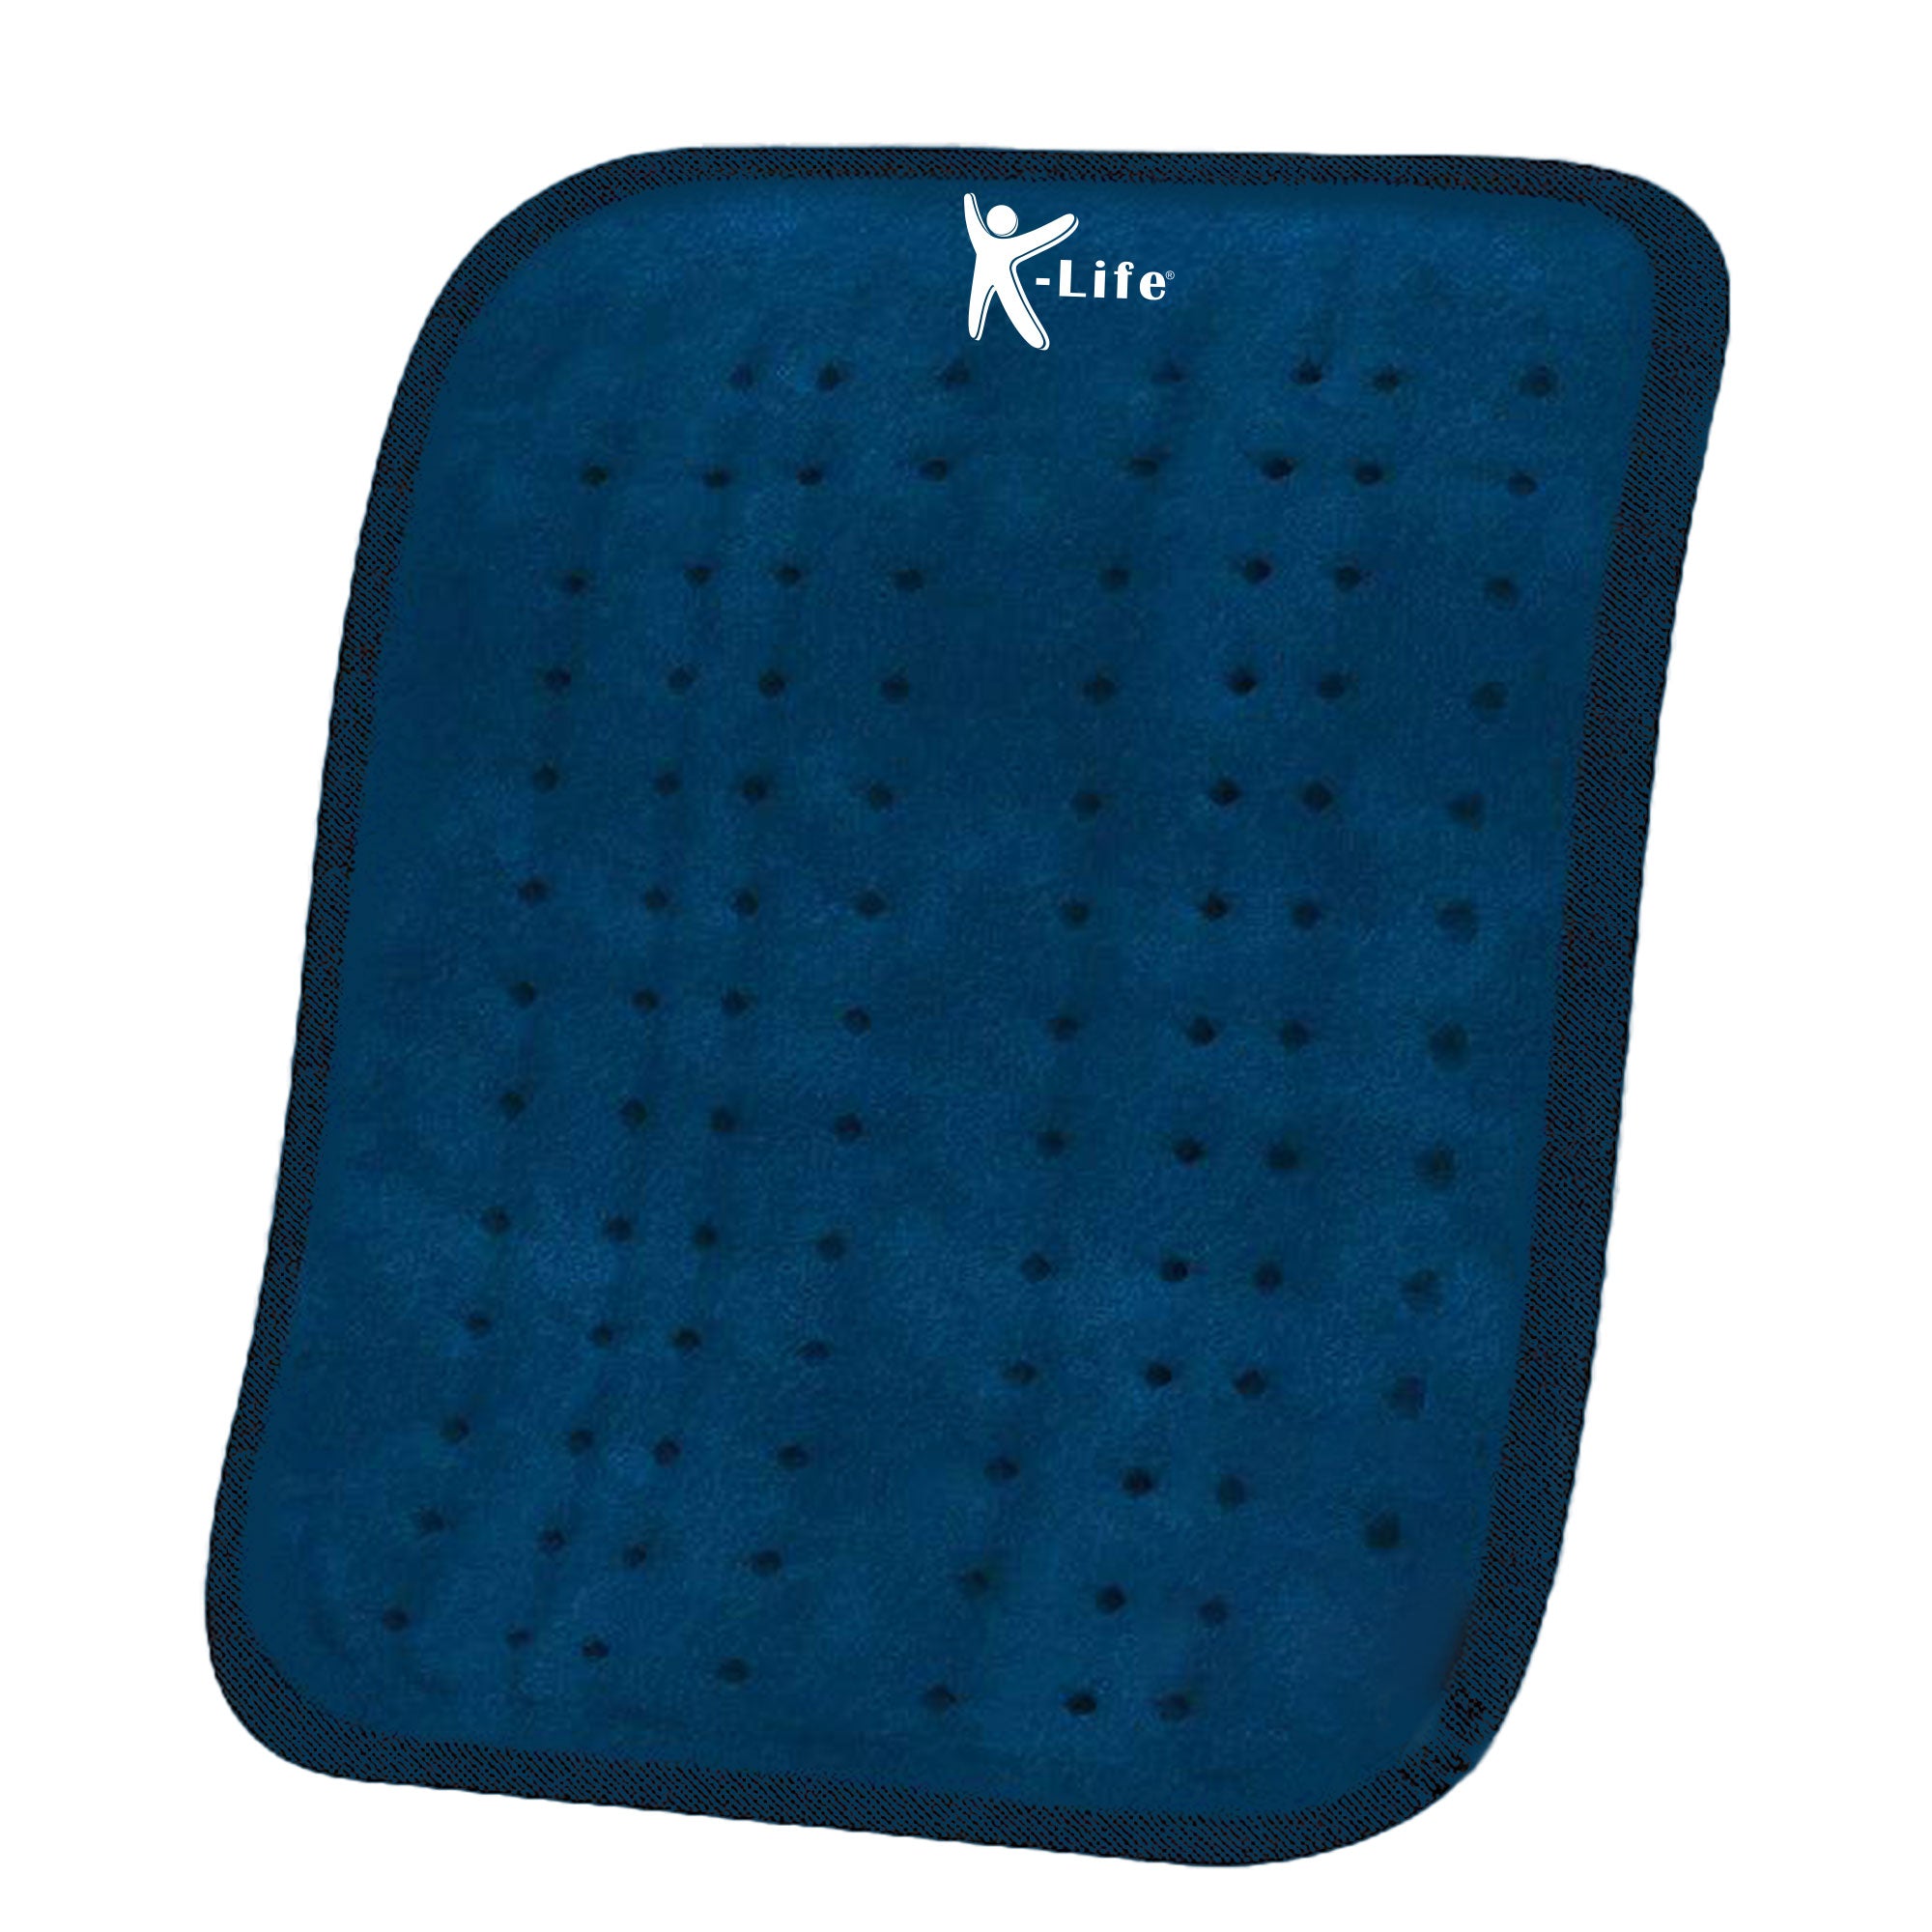 K-life Velvet Heat Therapy Orthopedic Pain Relief Electric Heating Pad with Temperature Controller for Joints, Muscle, Back, Leg, Shoulder, Knee, Neck & Period Cramps